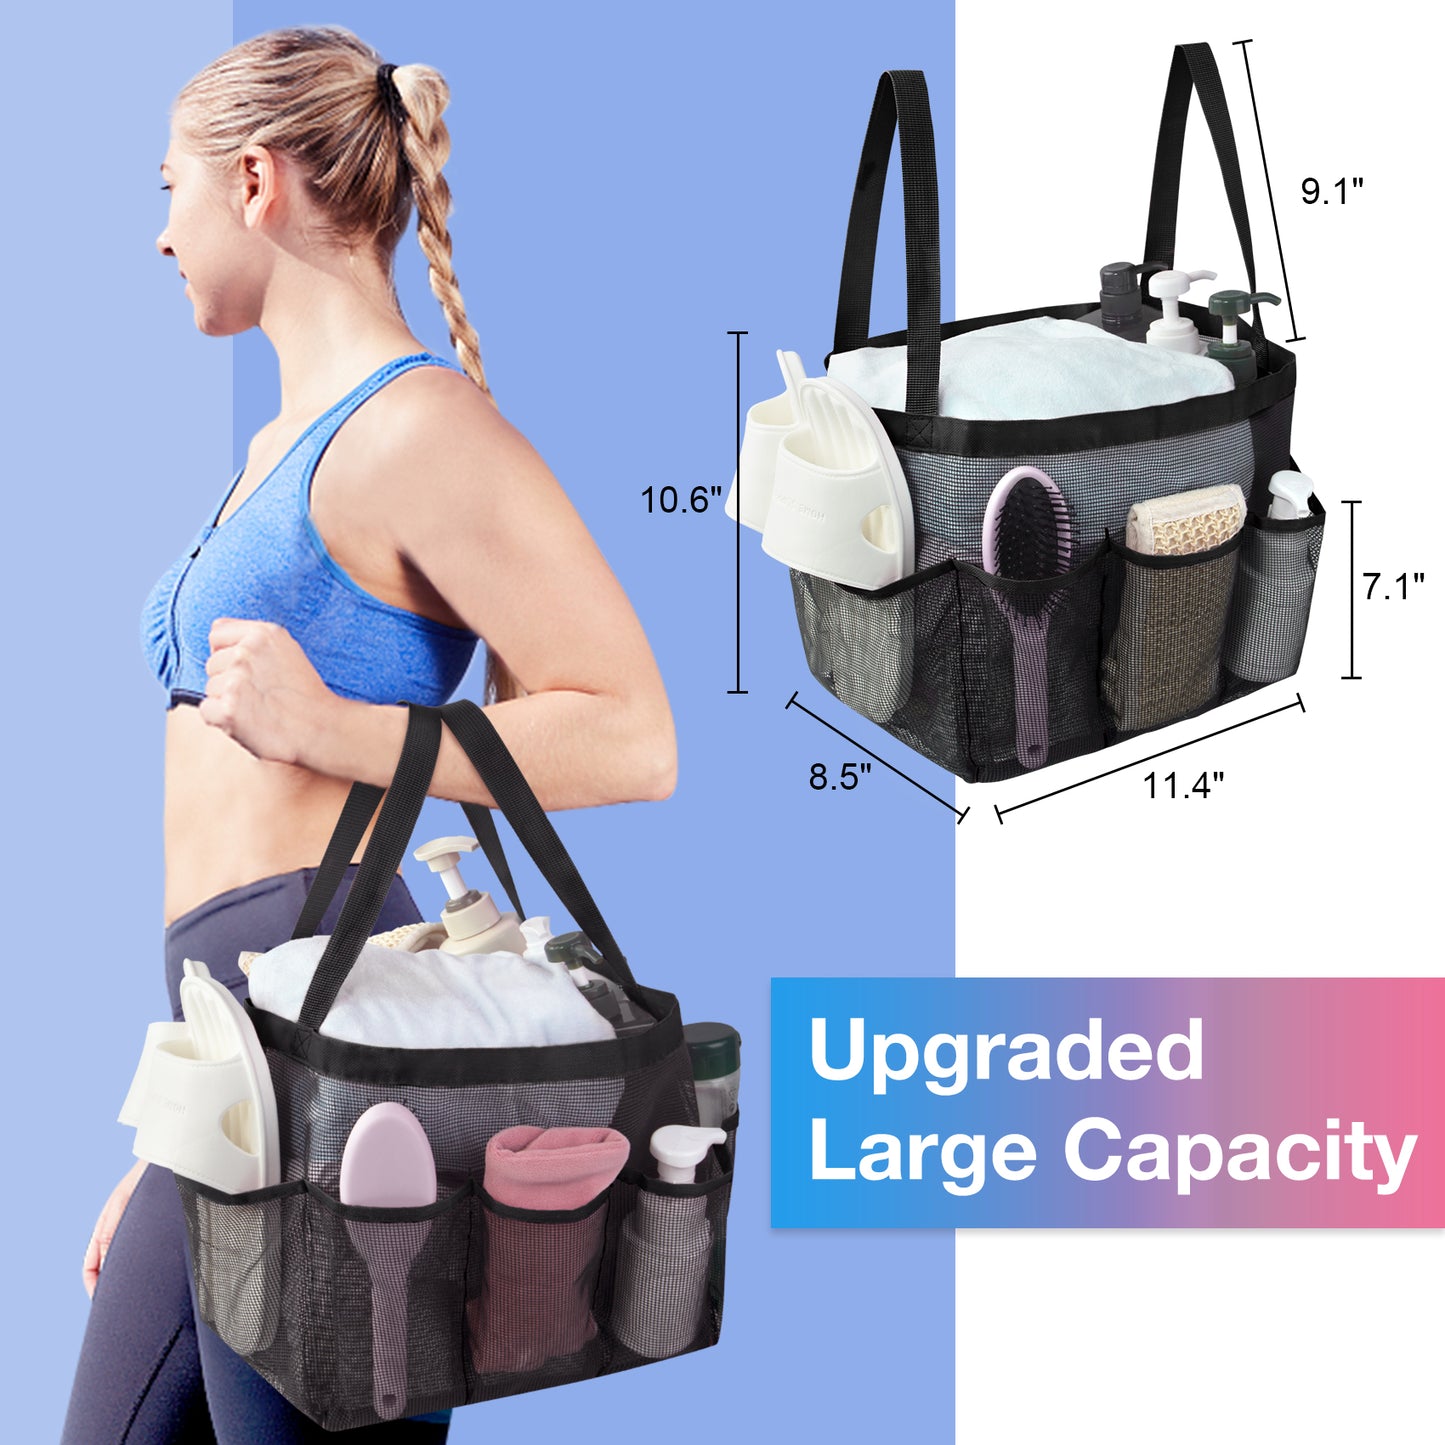 Loritta XL Mesh Shower Caddy Portable with 8 Pockets Large Capacity Quick Dry Dorm Shower Tote Bag